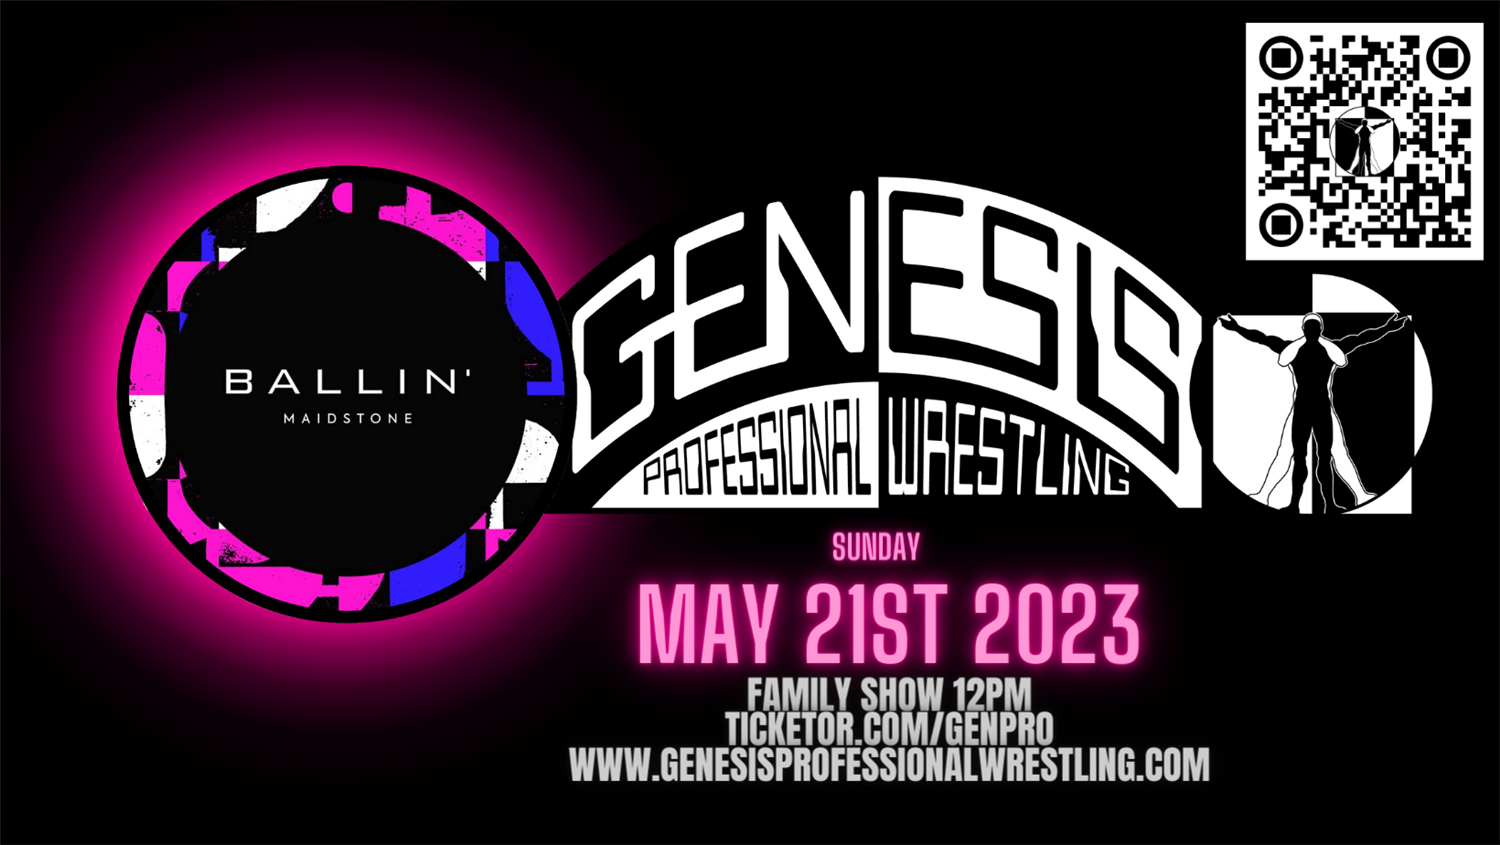 Genesis Professional Wrestling Family Show Ballin' Maidstone, family Show 12PM on May 21, 12:00@Ballin' - Pick a seat, Buy tickets and Get information on Genesis Professional Wrestling 